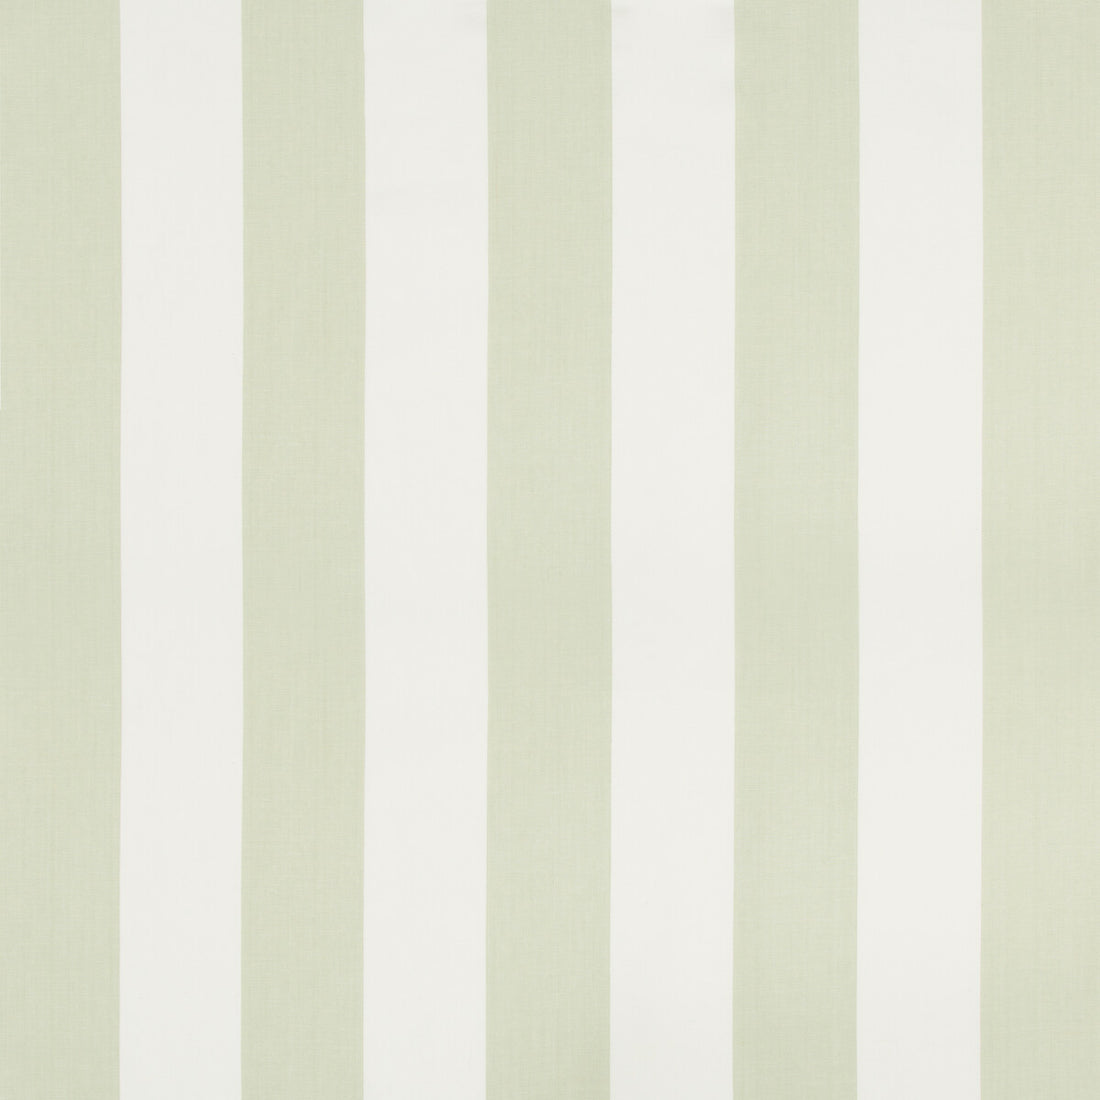 St Croix Stripe fabric in leaf color - pattern 2018145.123.0 - by Lee Jofa in the Suzanne Kasler The Riviera collection